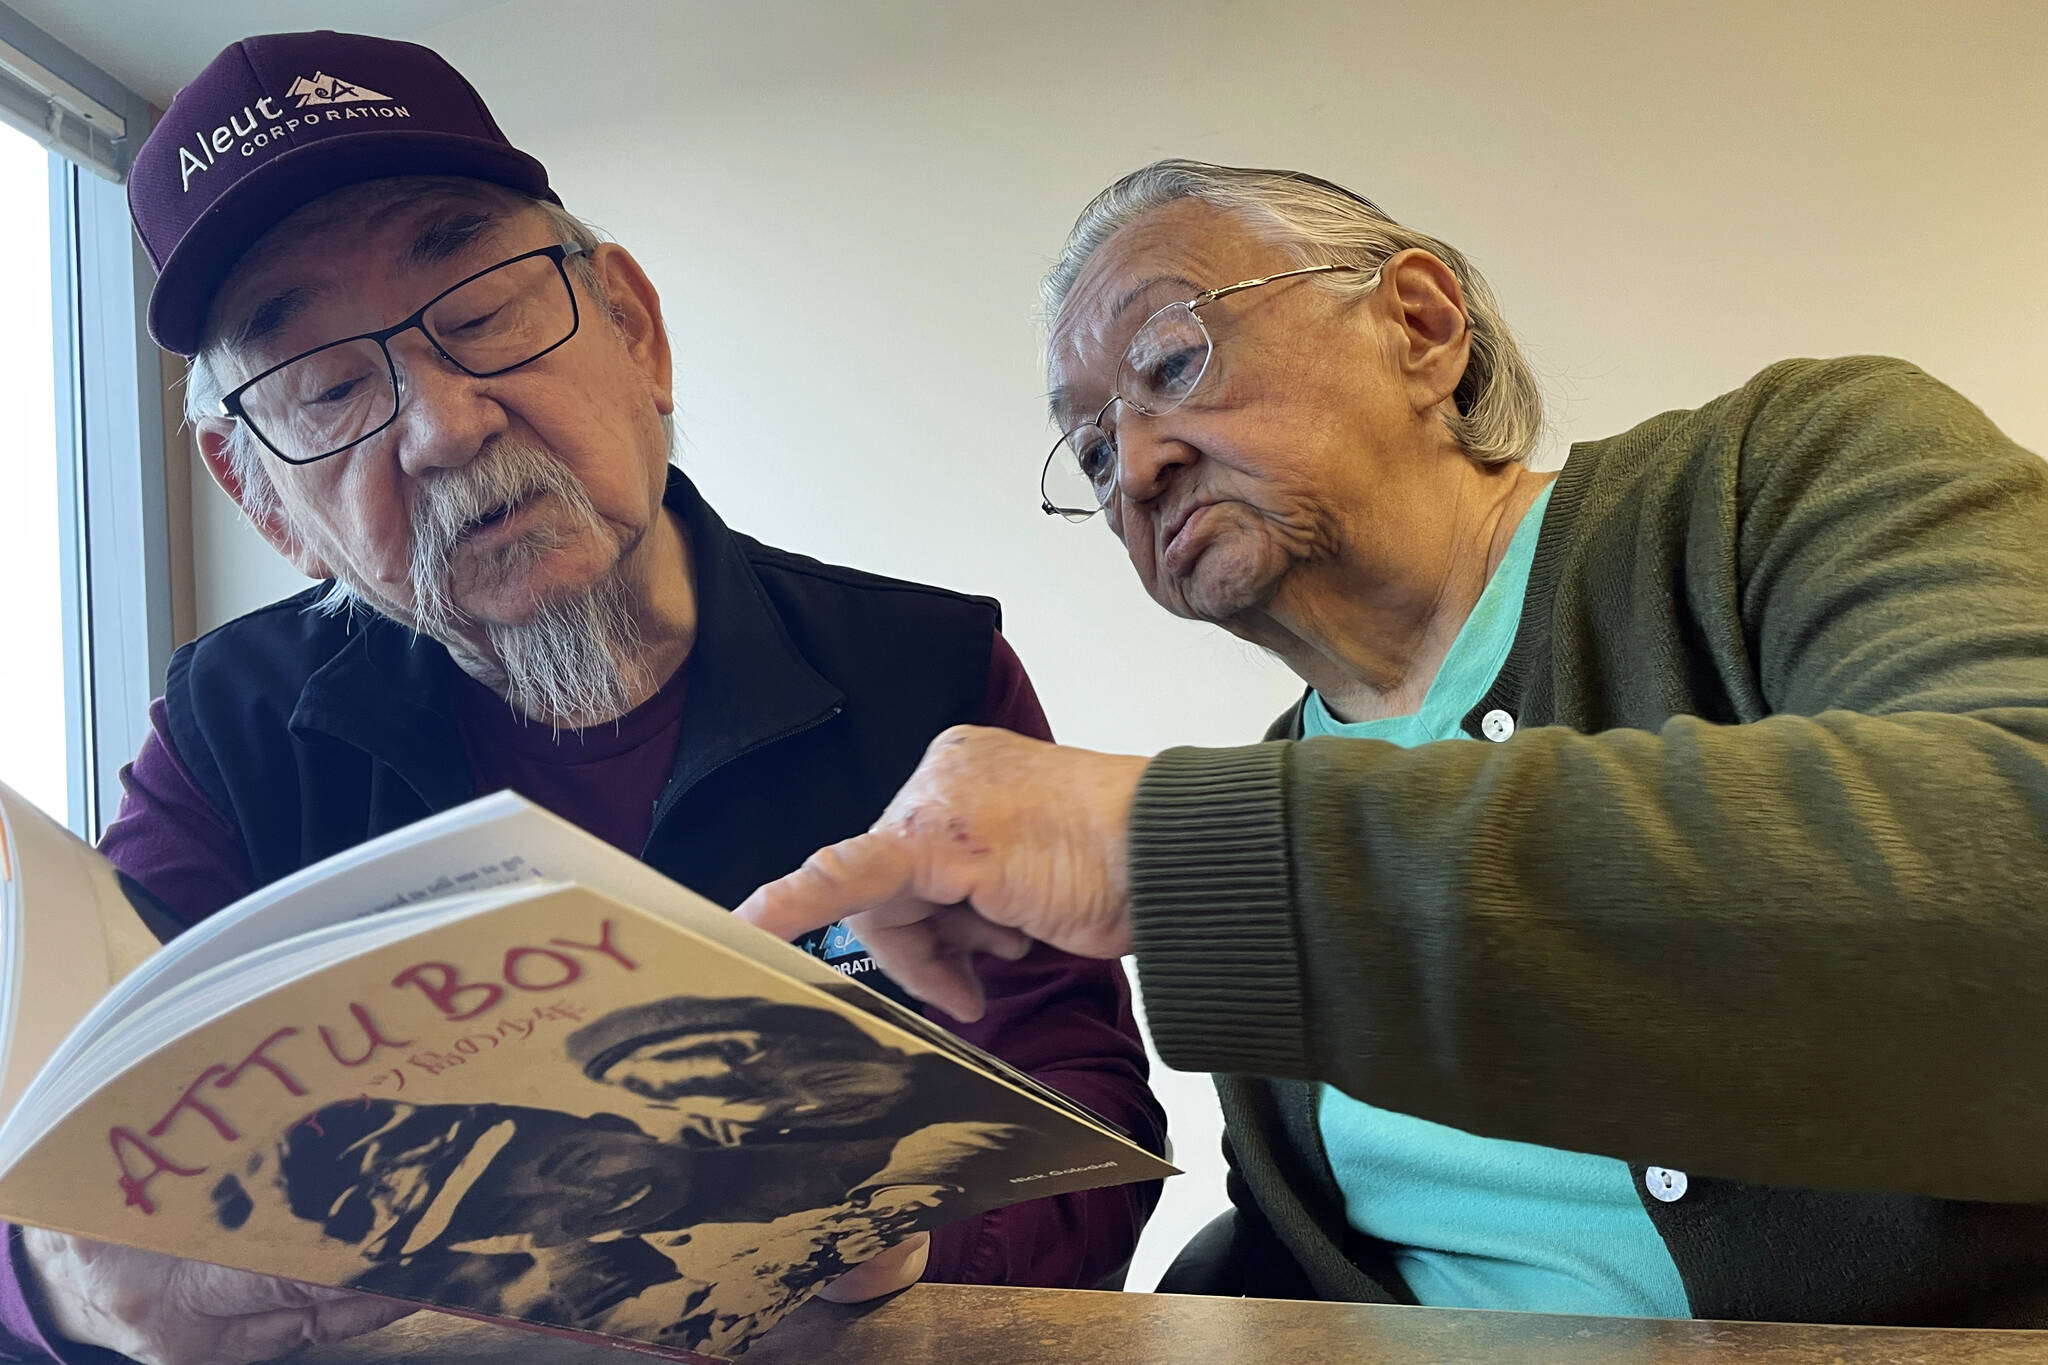 George Kudrin, left, and Pauline Golodoff look at a copy of the book “Attu Boy,” Friday, Dec. 1, 2023, in Anchorage, Alaska. Gregory Golodoff, Pauline’s late husband, and Elizabeth Golodoff Kudrin, George’s late wife, were the last two living residents of Attu, Alaska, whose entire population was captured by the Japanese during World War II and sent to Japan until being liberated after the war. “Attu Boy” was written by Nick Golodoff, who was Gregory and Elizabeth’s older brother. (AP Photo/Mark Thiessen)